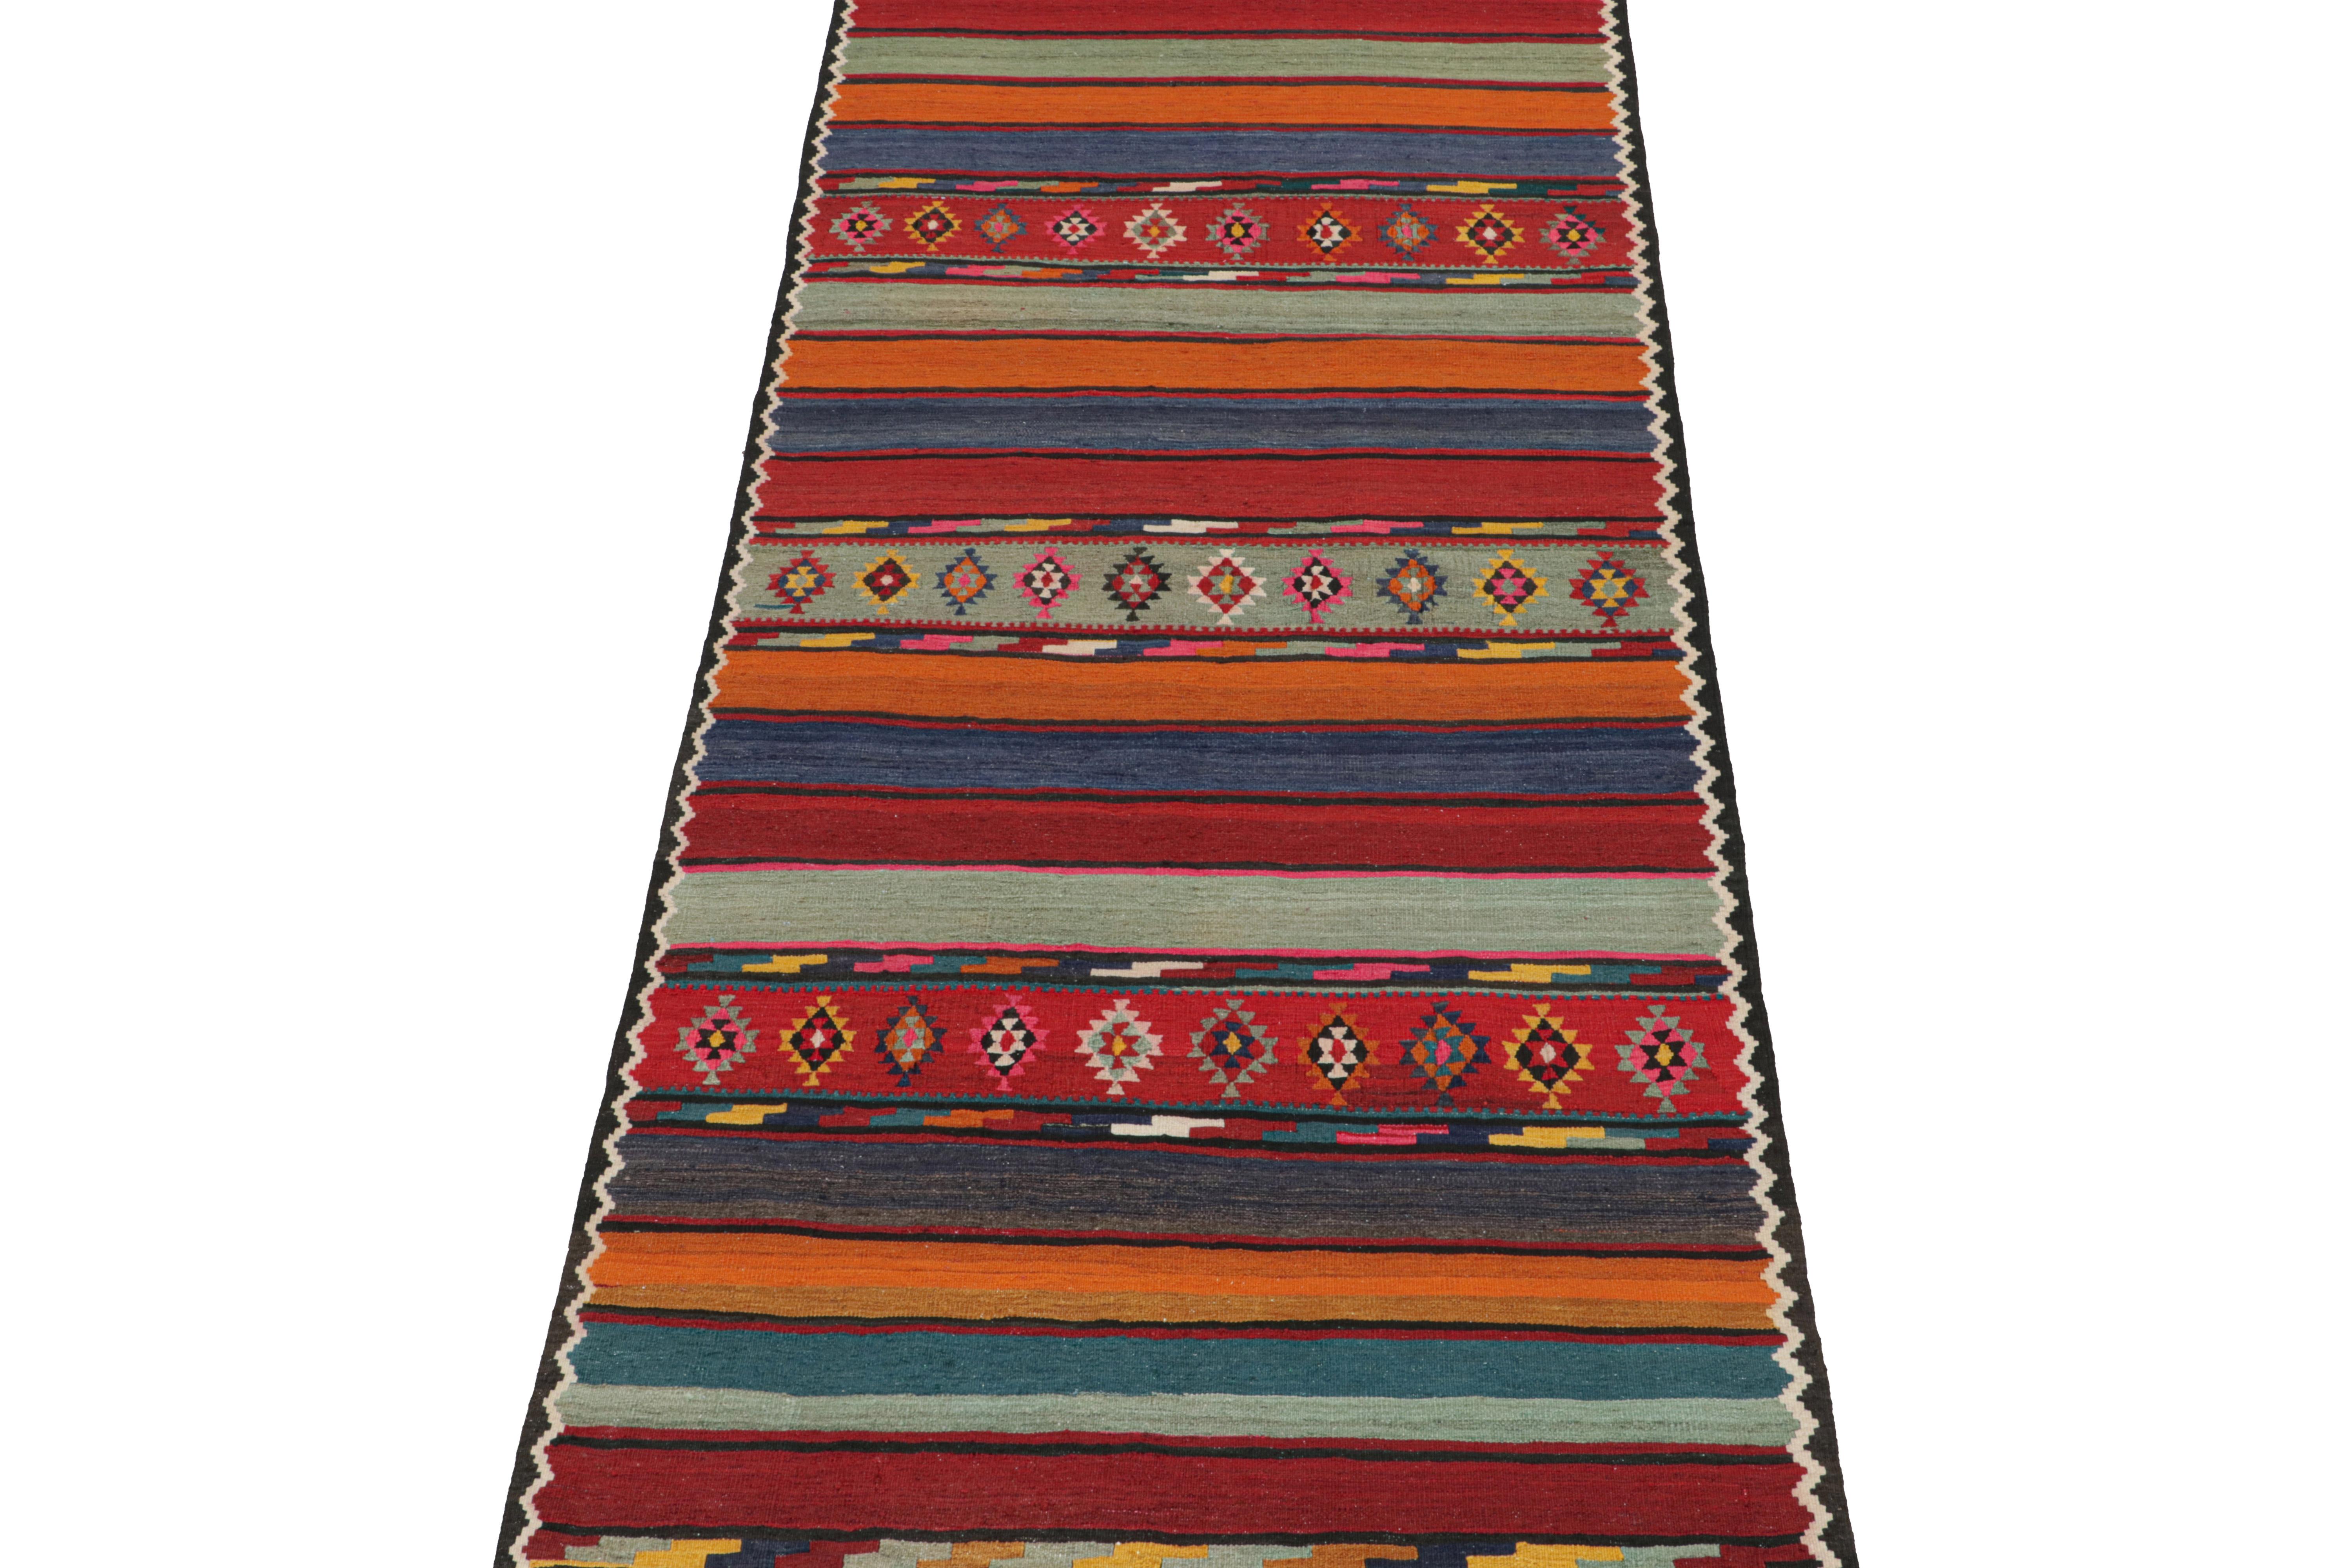 Vintage Northwest Persian Kilim with Stripes & Geometric Patterns In Good Condition For Sale In Long Island City, NY